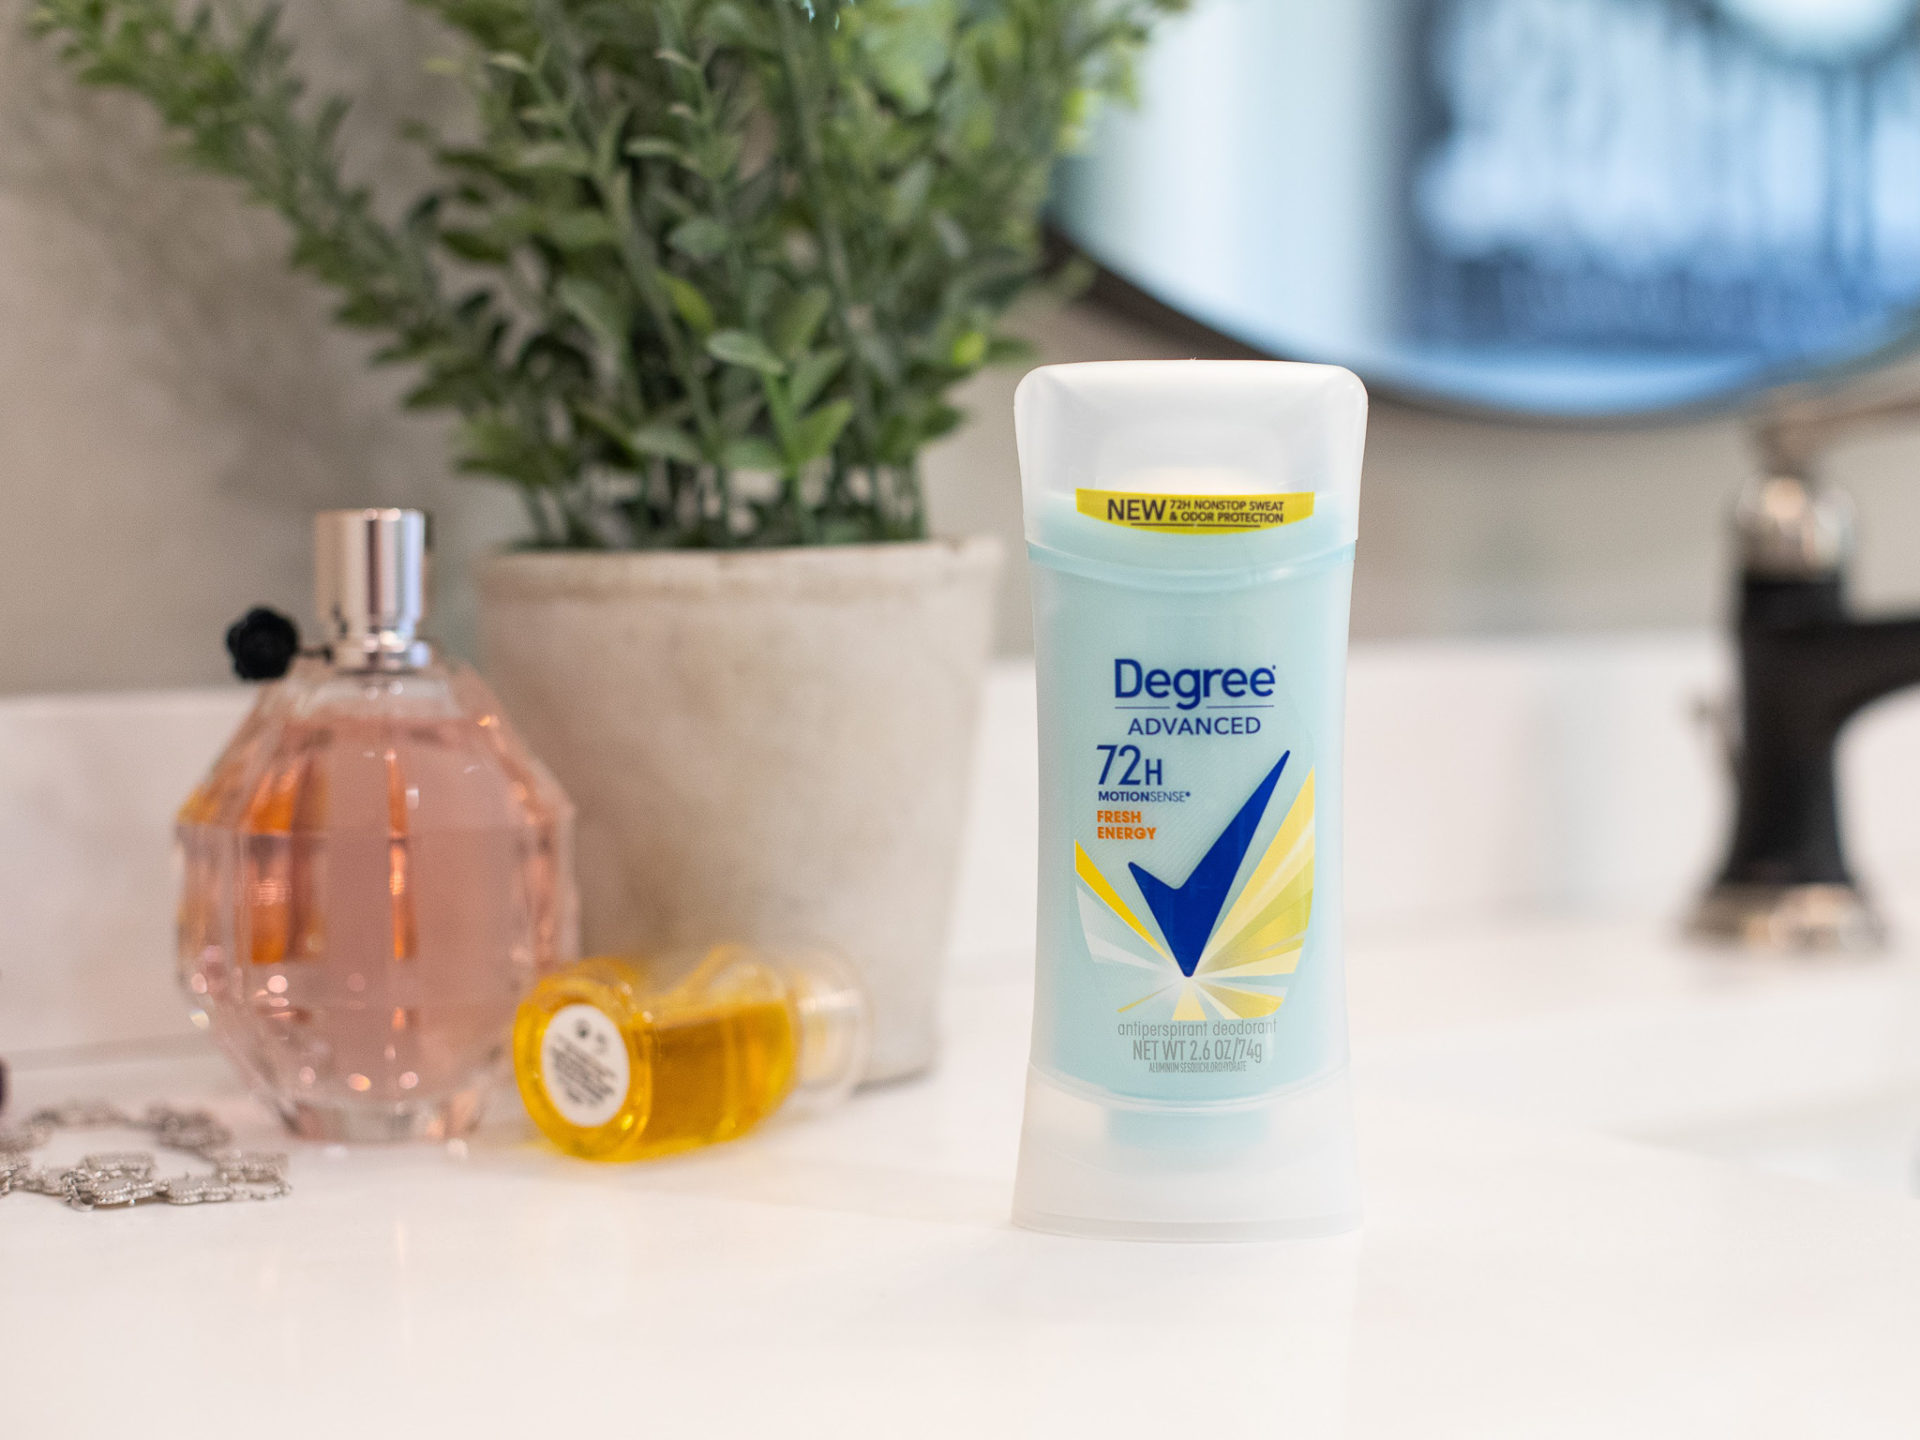 Get The New Degree Unlimited Deodorant As Low As $1.99 At Kroger (Regular Price $8.99) – Plus Cheap Motionsense Deodorant